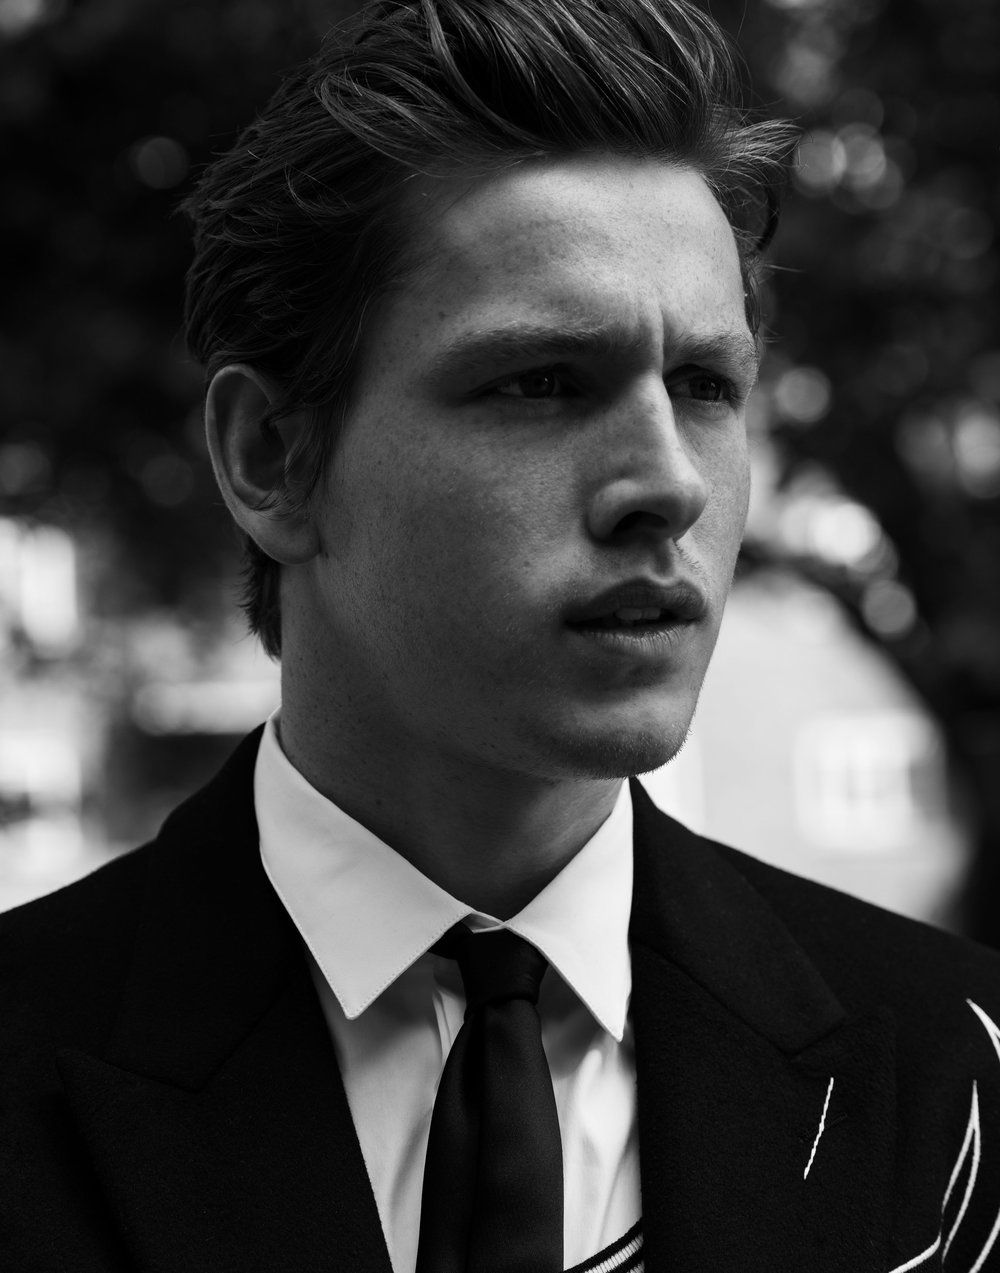 DIOR HOMME coat, shirt, and tie. Photographer: Justin Campbell. Stylist: Jay Hines. Groomer: Jody Taylor